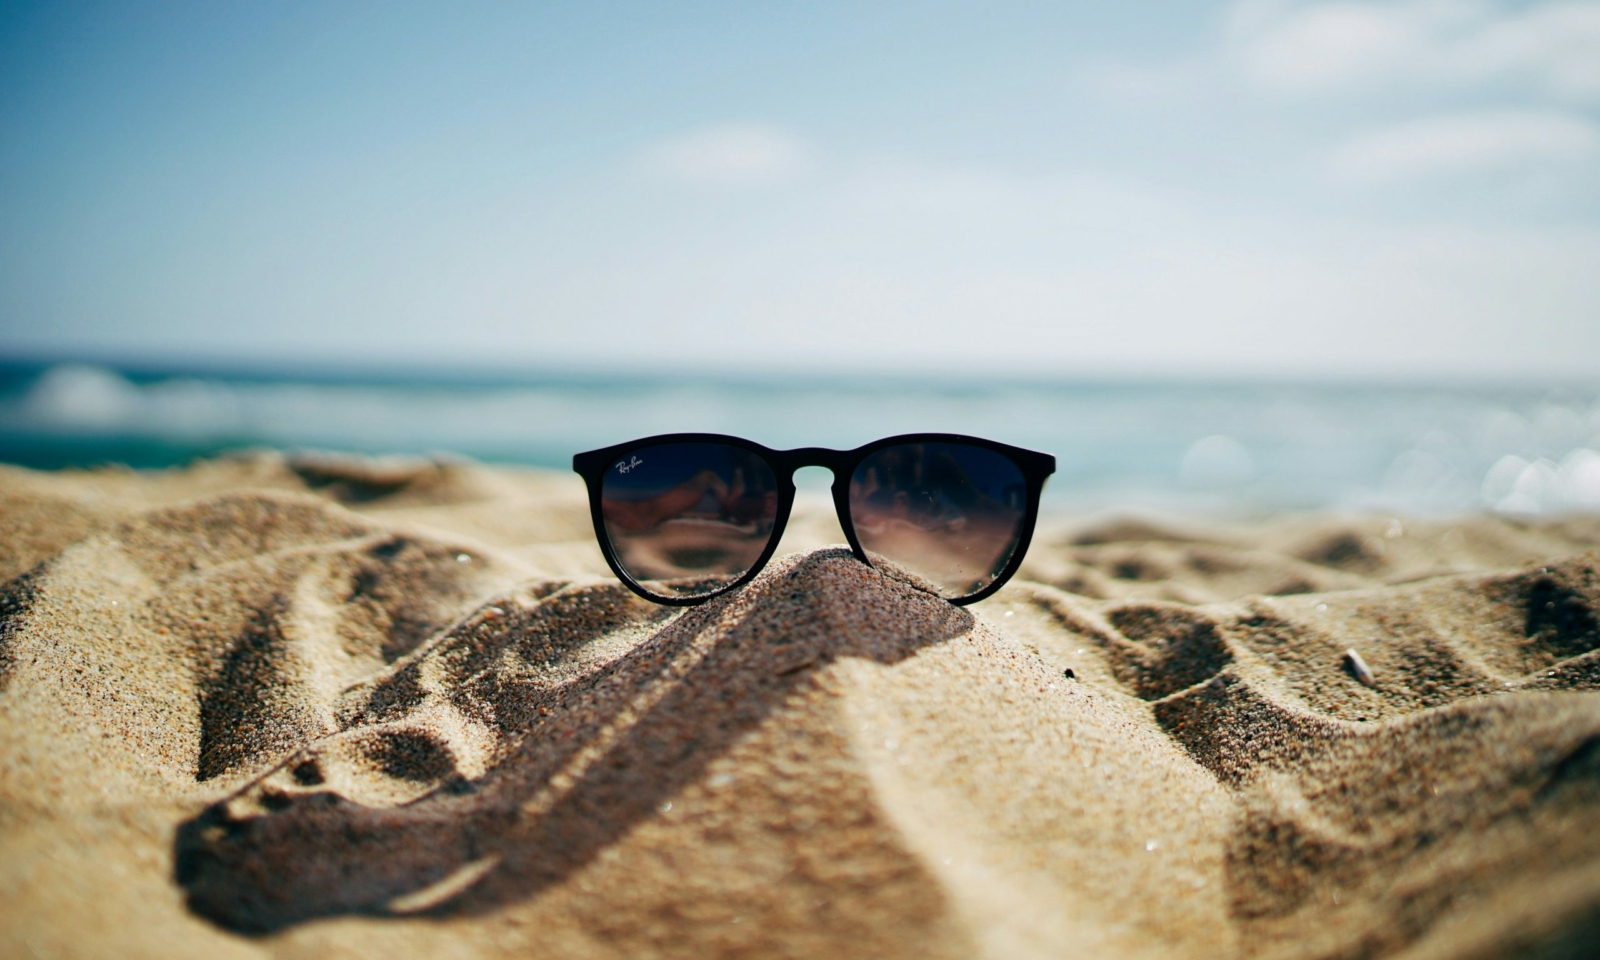 How to prepare your website for summer